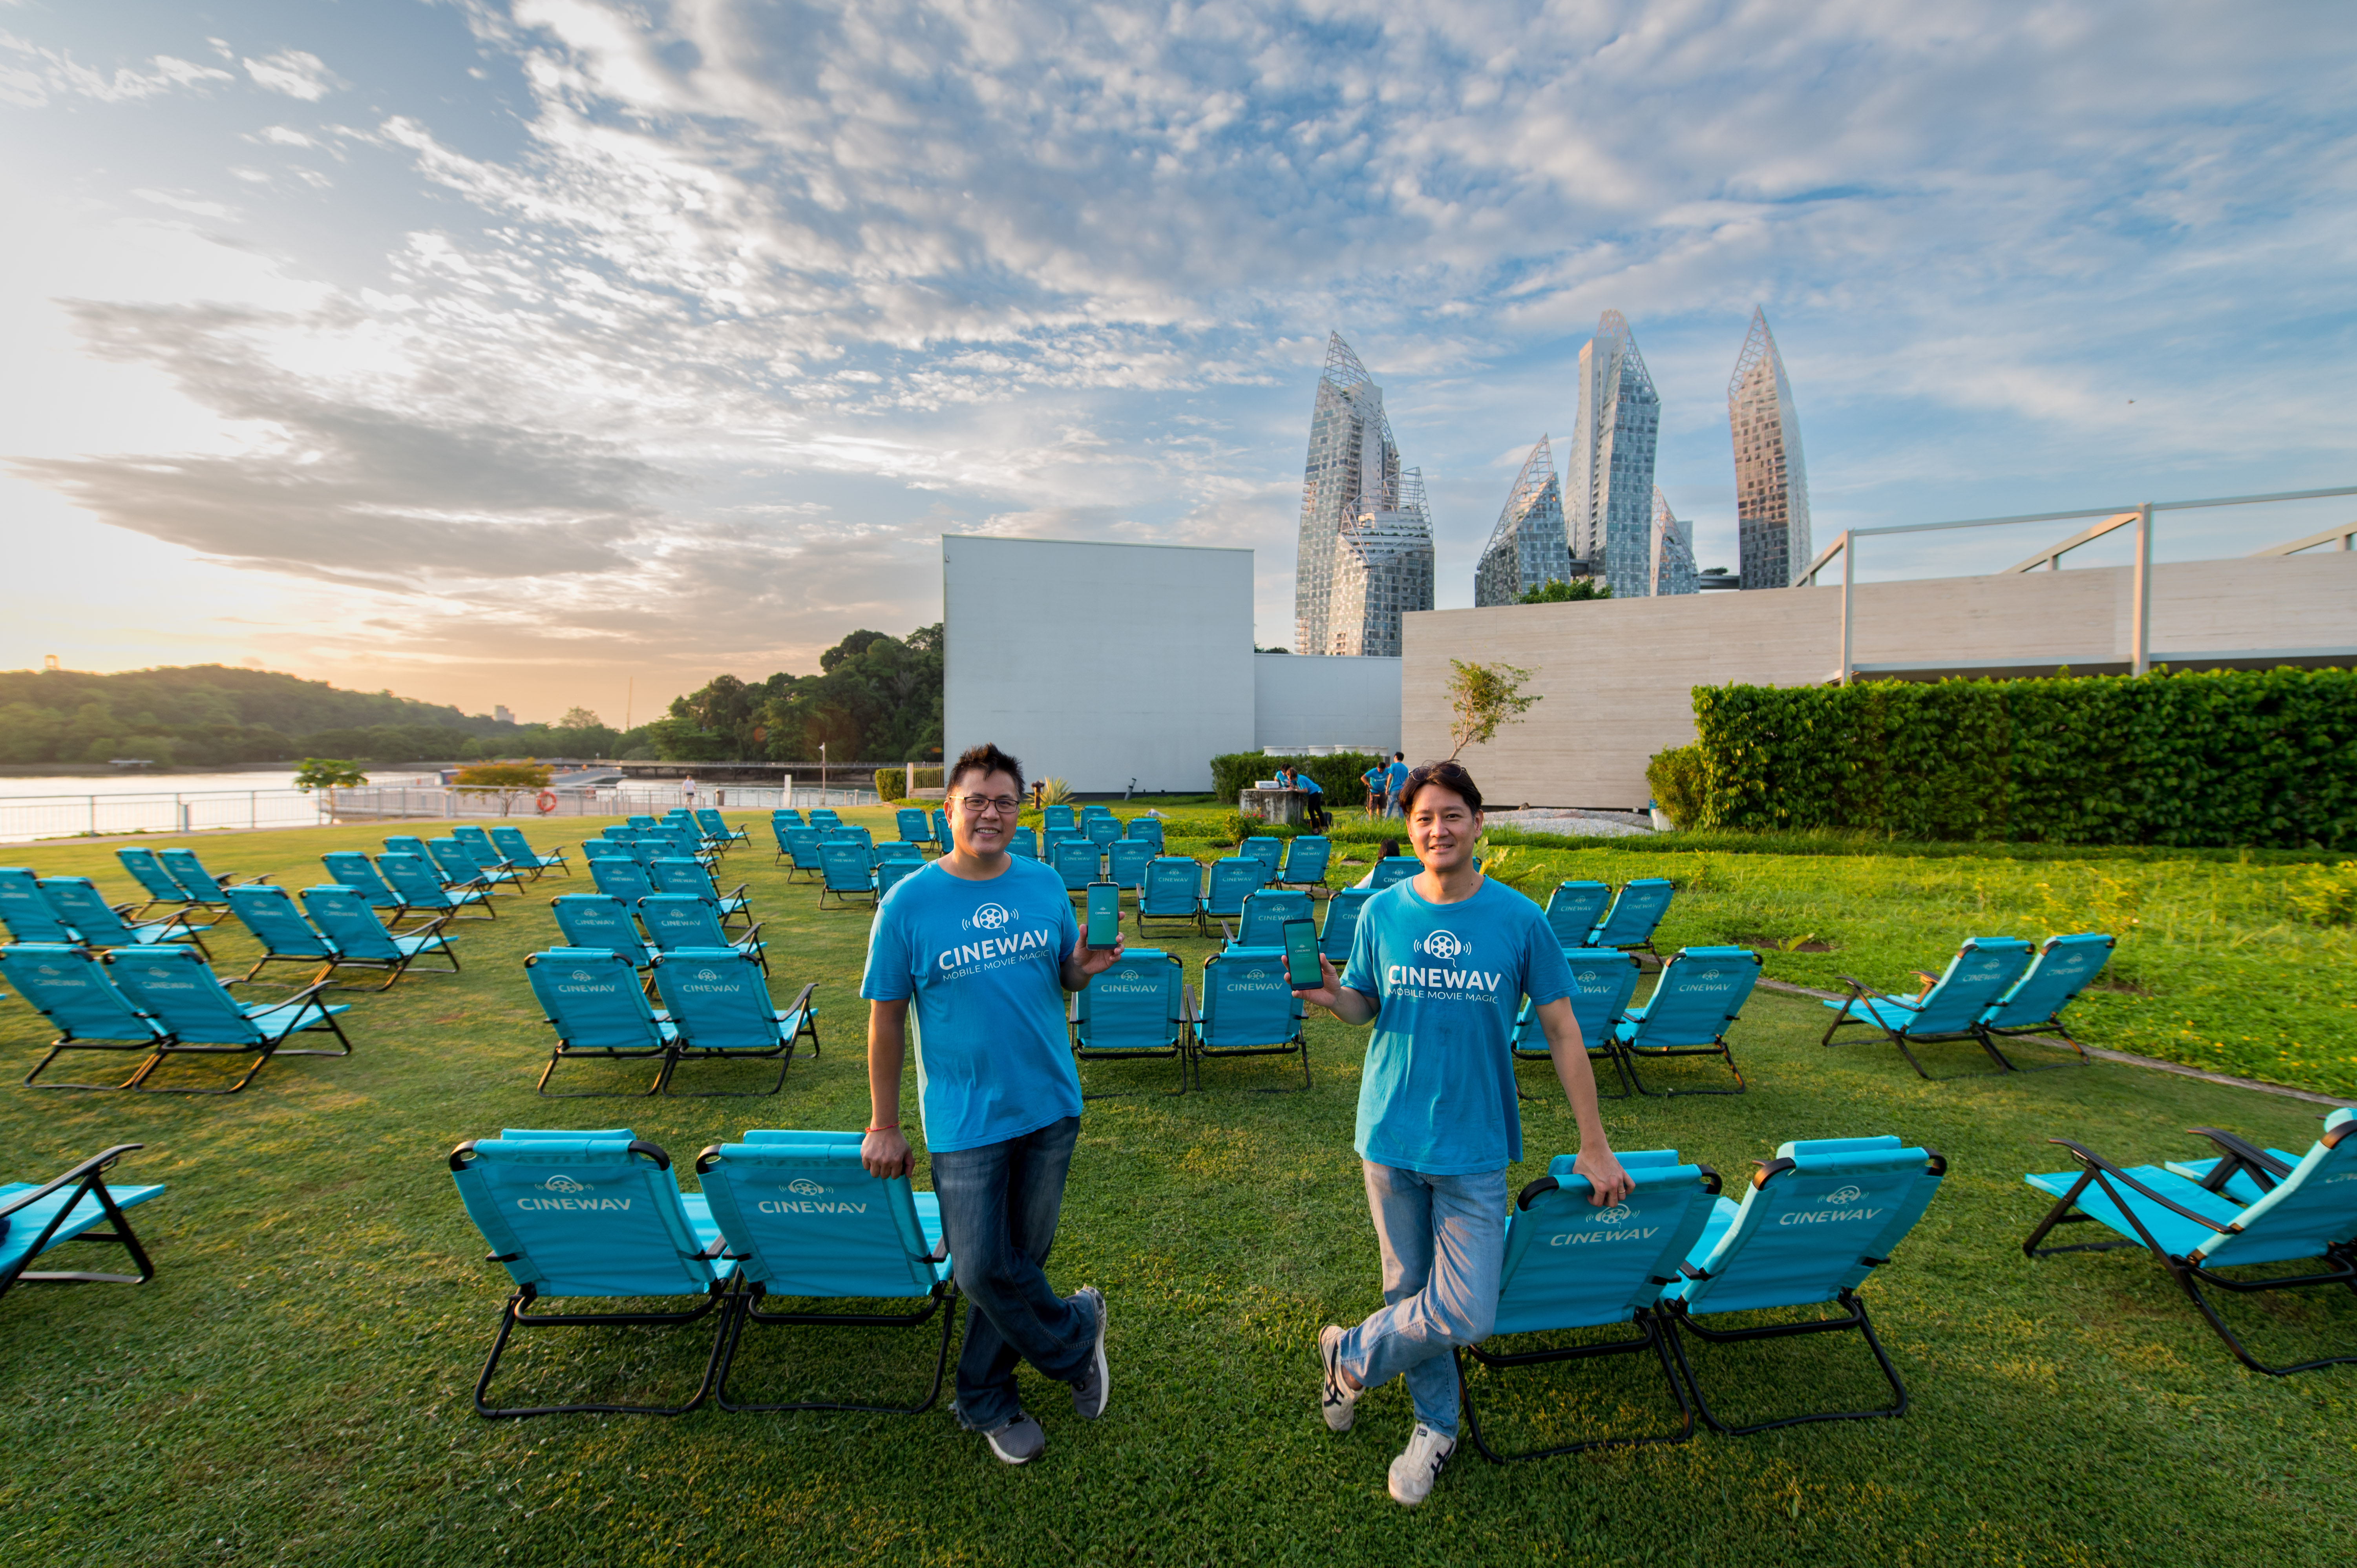 Two smiling men in blue Cinewav t-shirts hold up phones with the app at an outdoor pop-up cinema on a green lawn